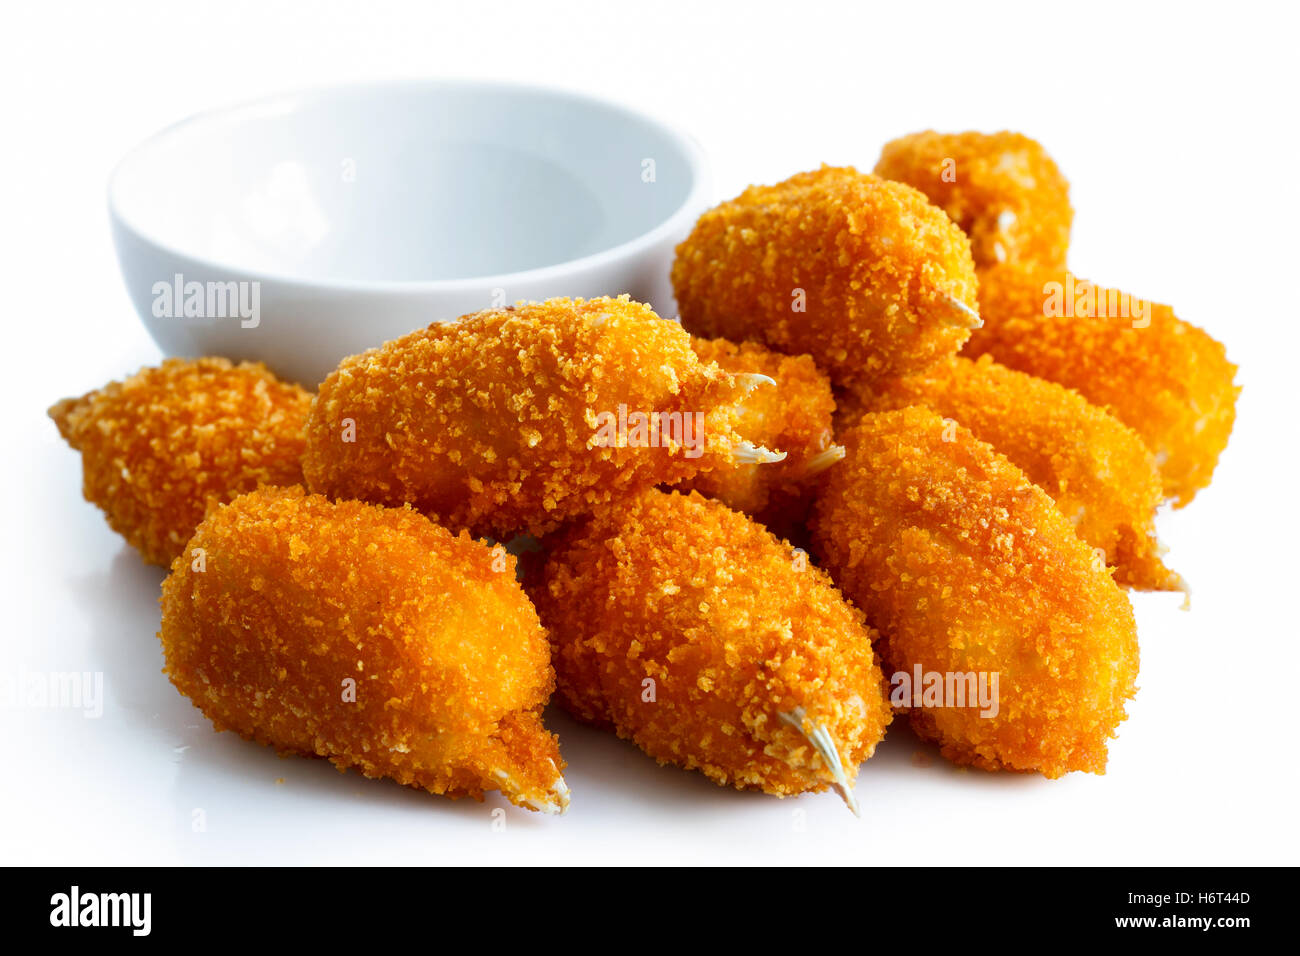 Pile of fried breaded surimi crab claws with empty dip bowl isolated on white. Stock Photo